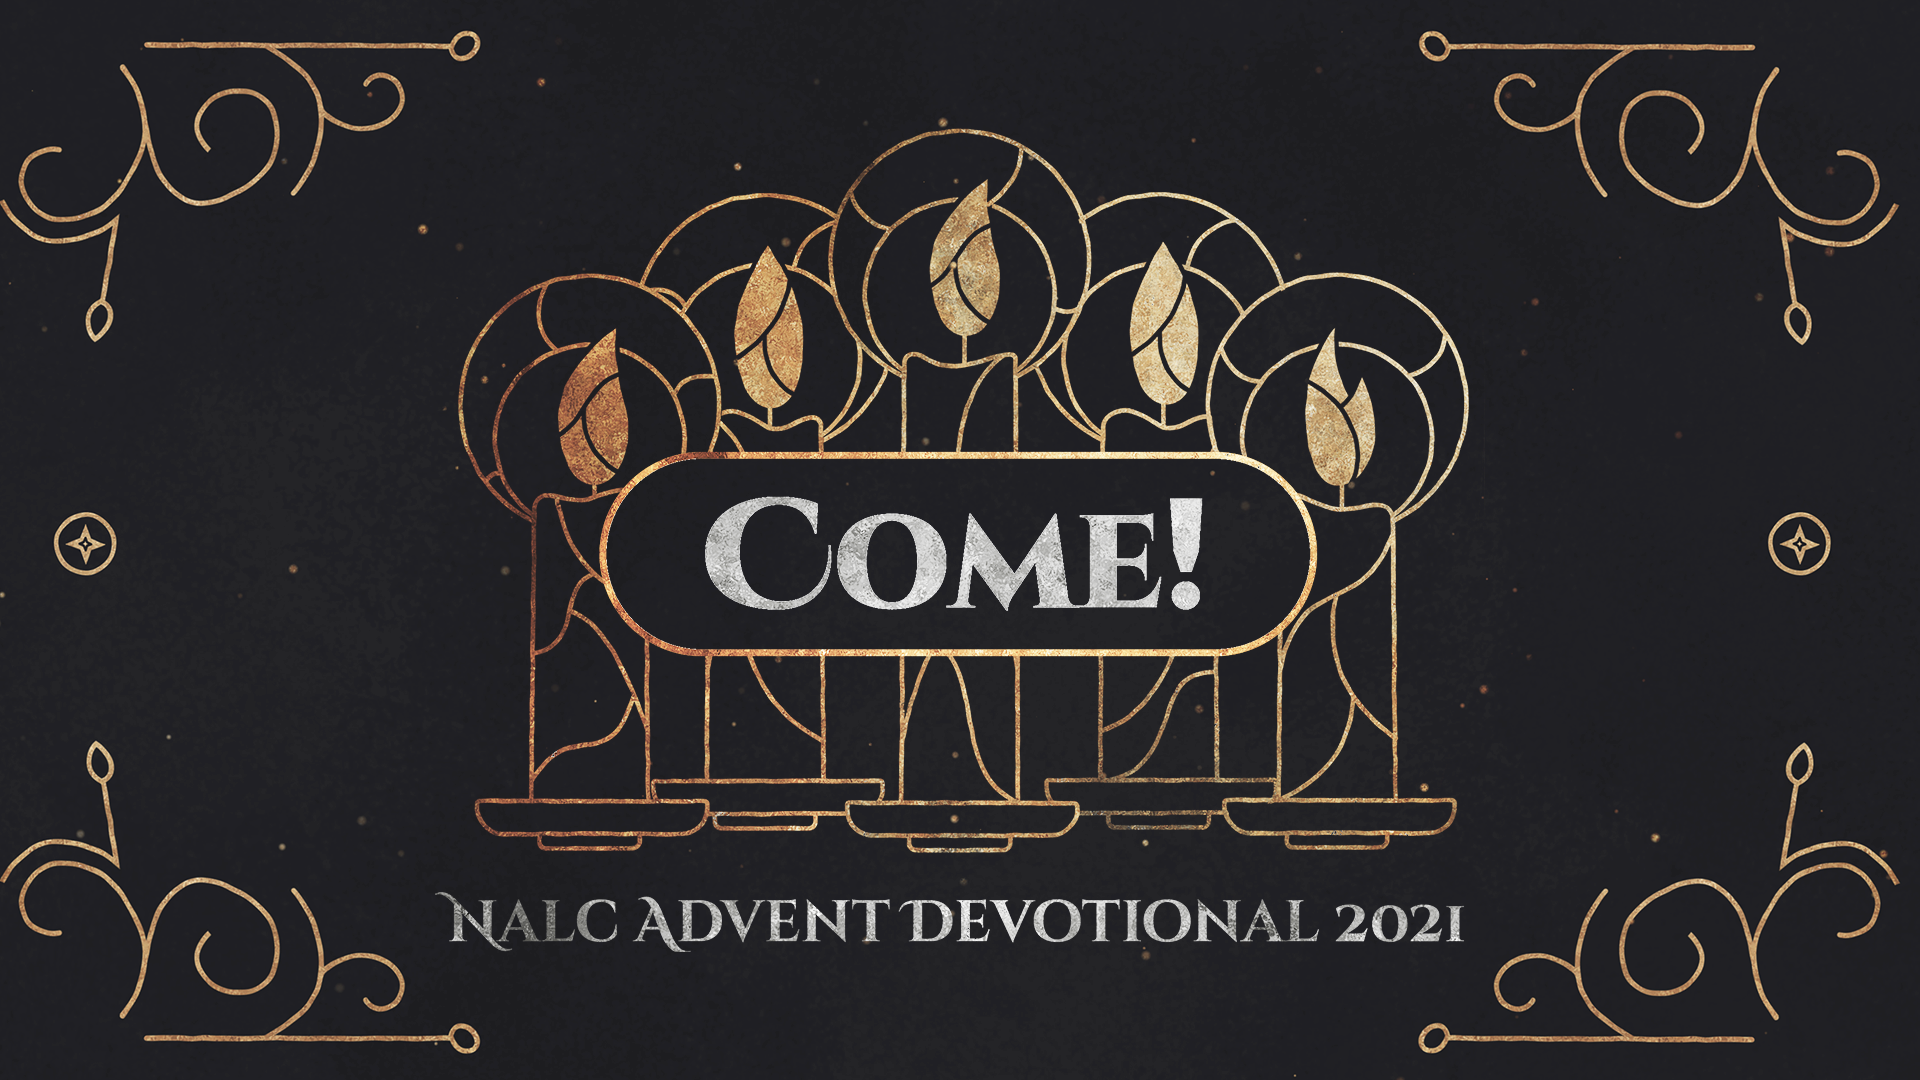 December 5, 2021 | The Second Sunday in Advent